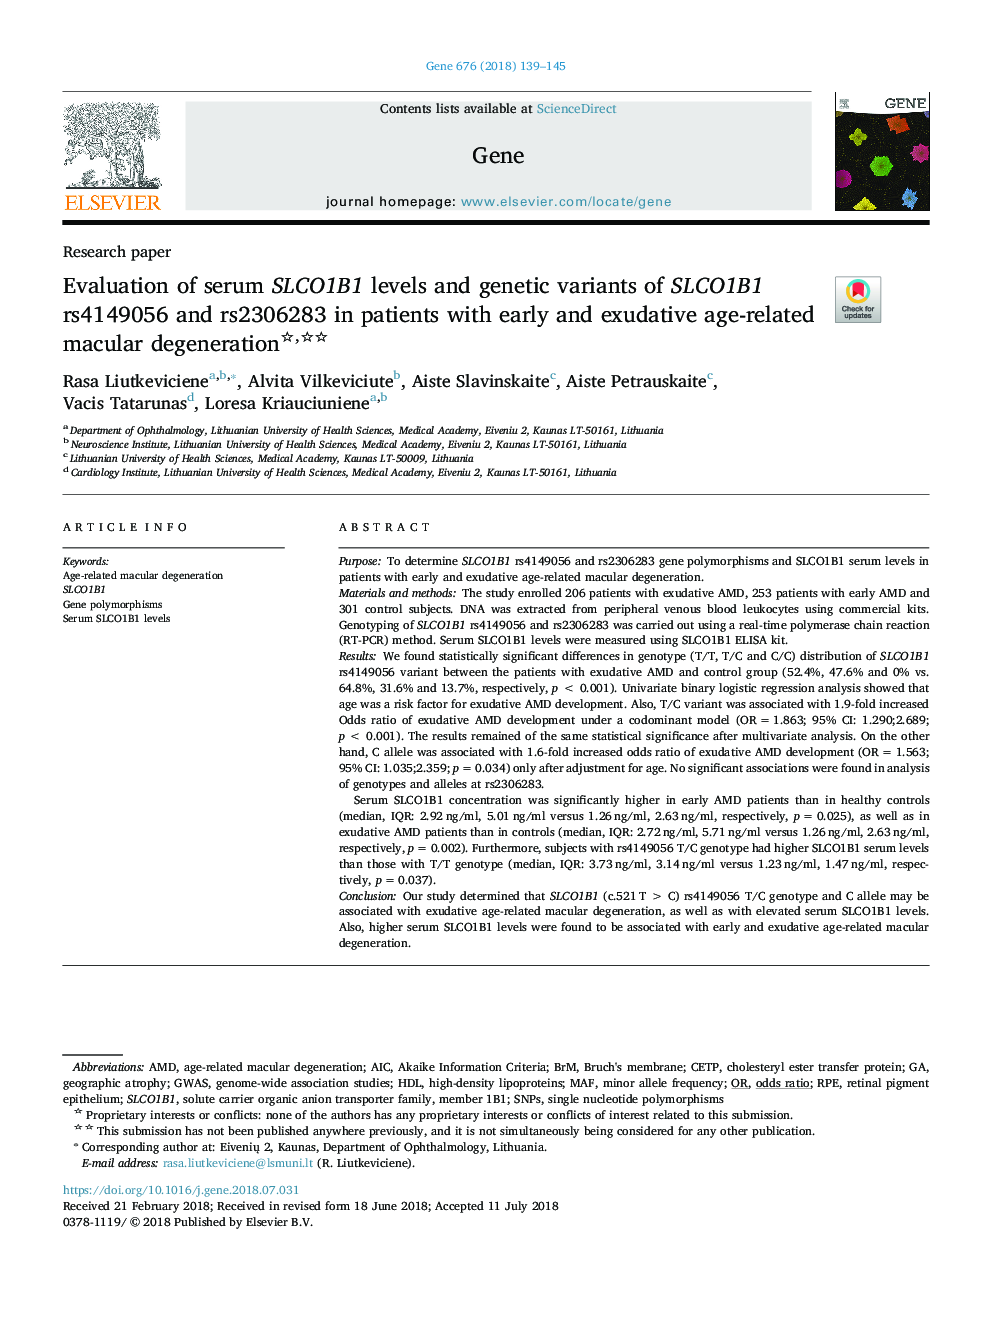 Evaluation of serum SLCO1B1 levels and genetic variants of SLCO1B1 rs4149056 and rs2306283 in patients with early and exudative age-related macular degeneration